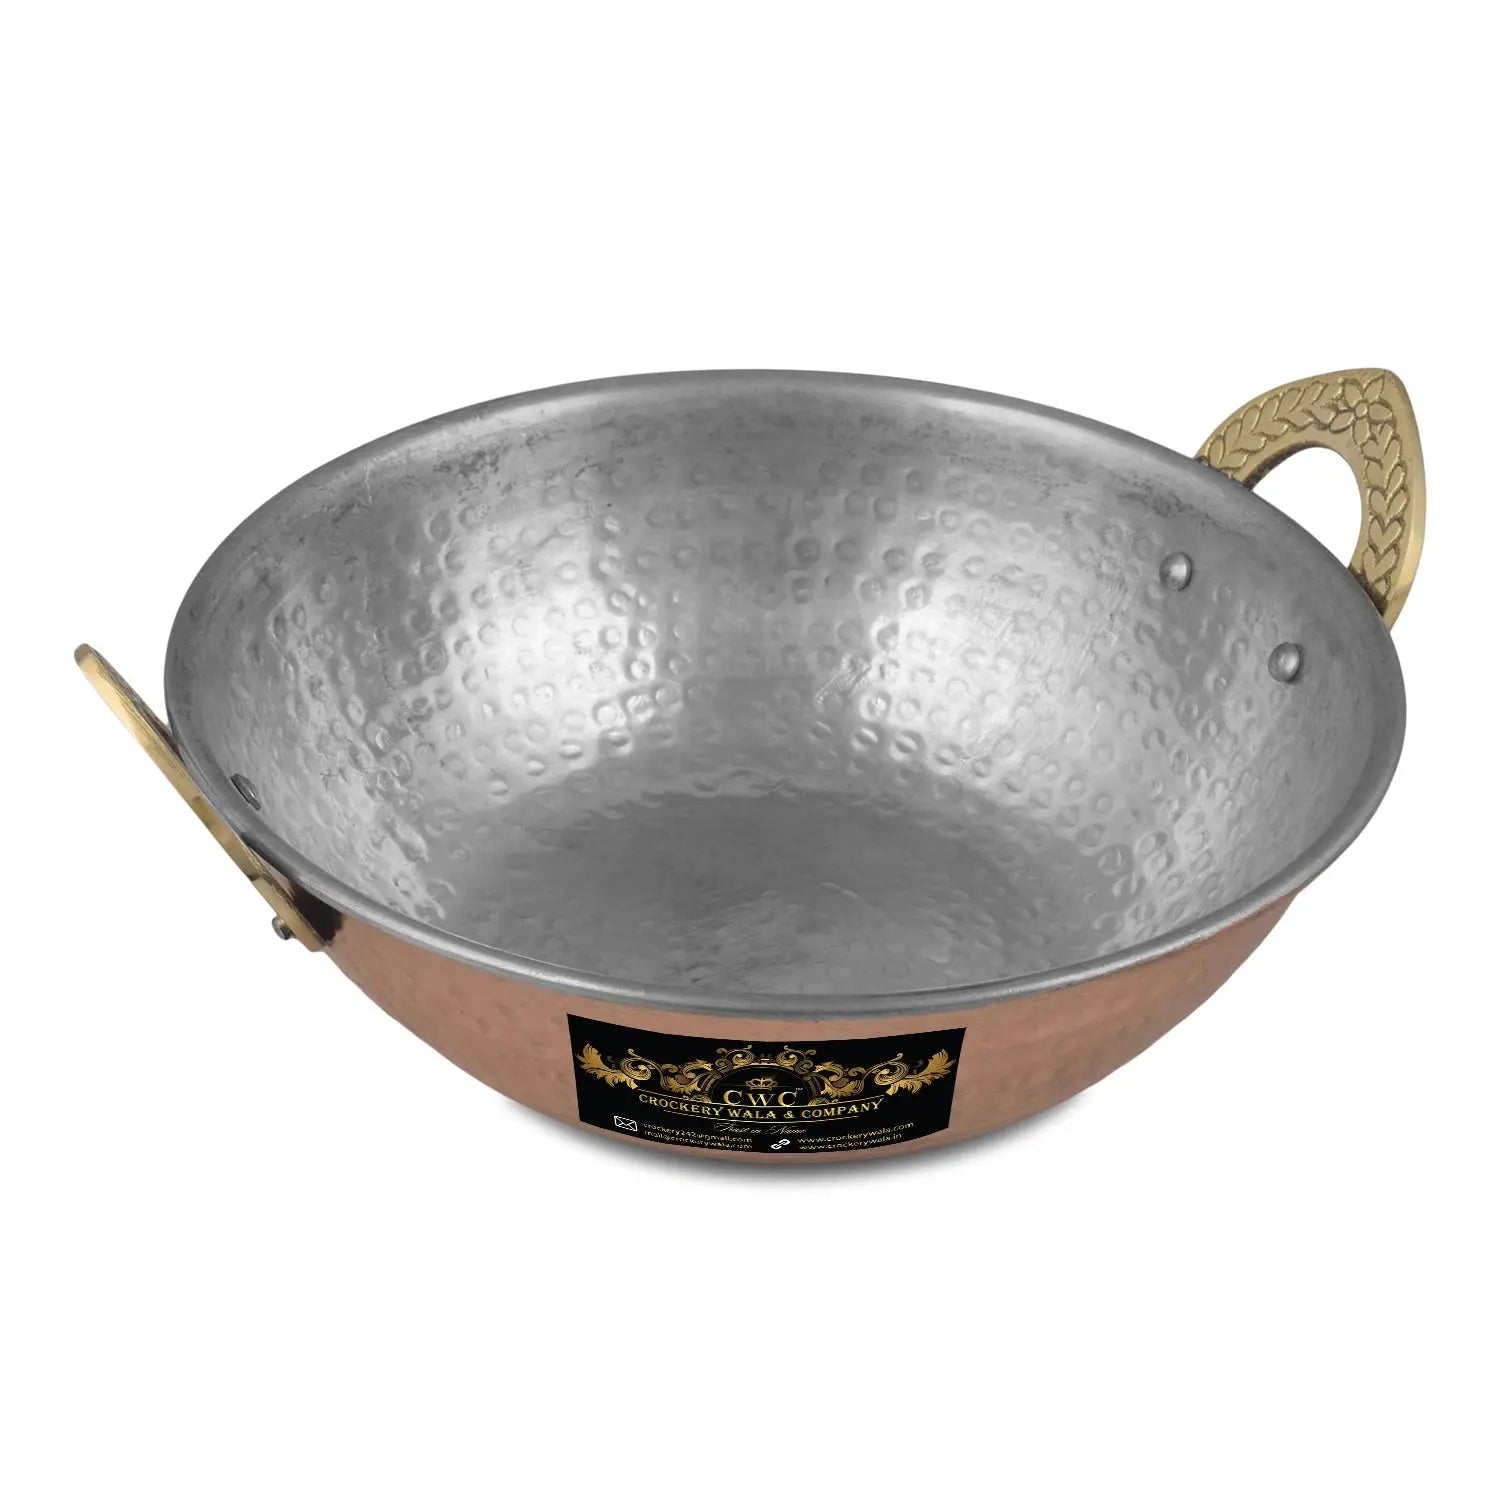 Pure Copper karhai with Brass Handles 6.5 inch